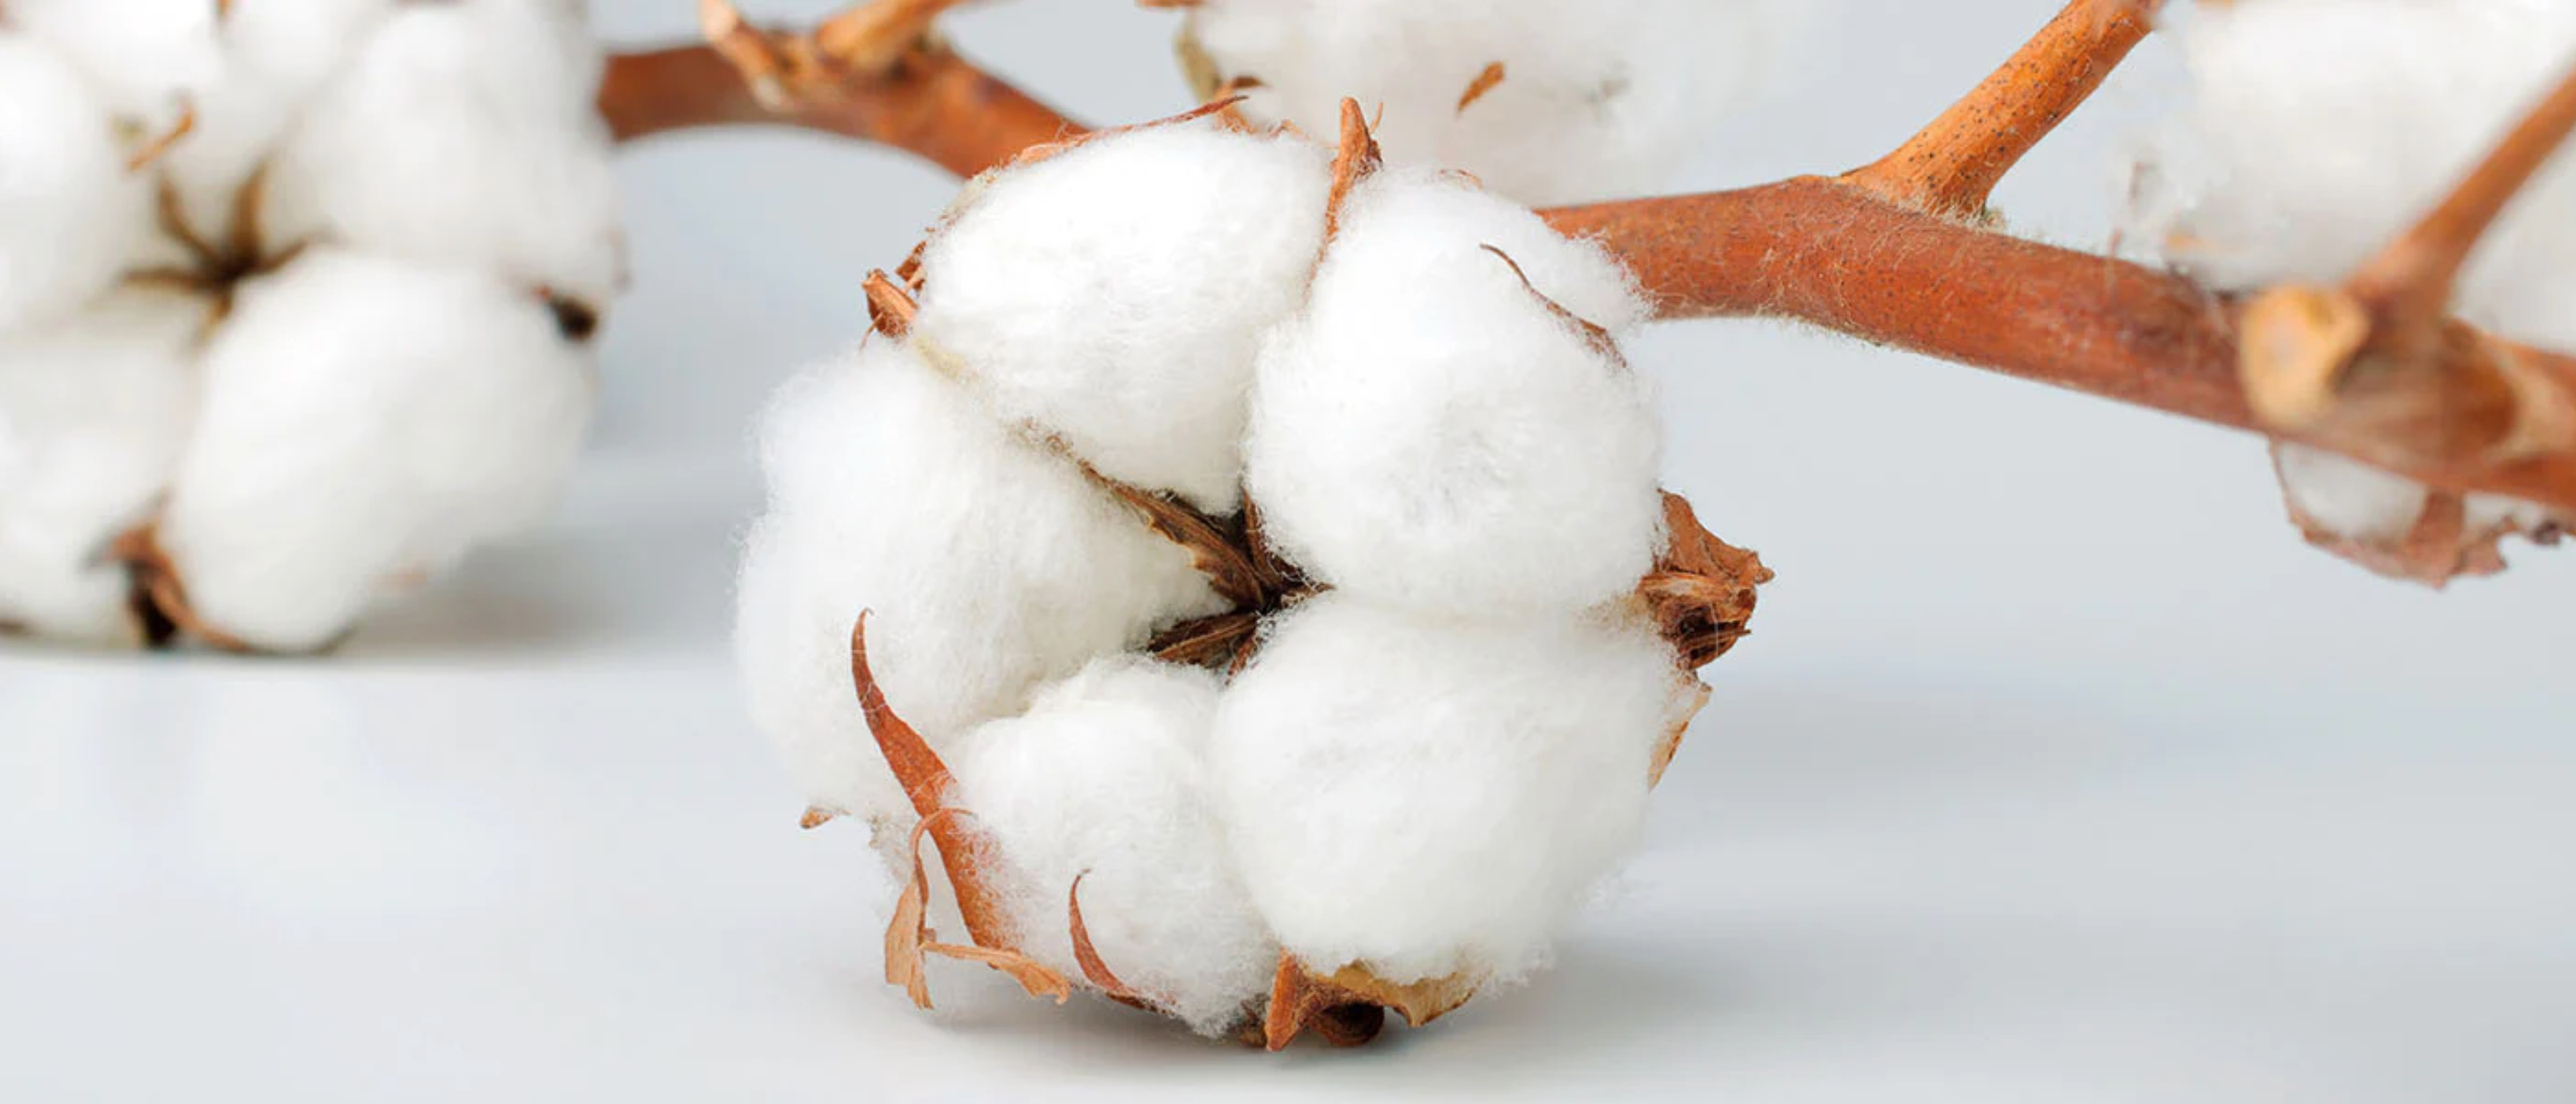 Organic Cotton vs. Regular Cotton: How Do They Differ?